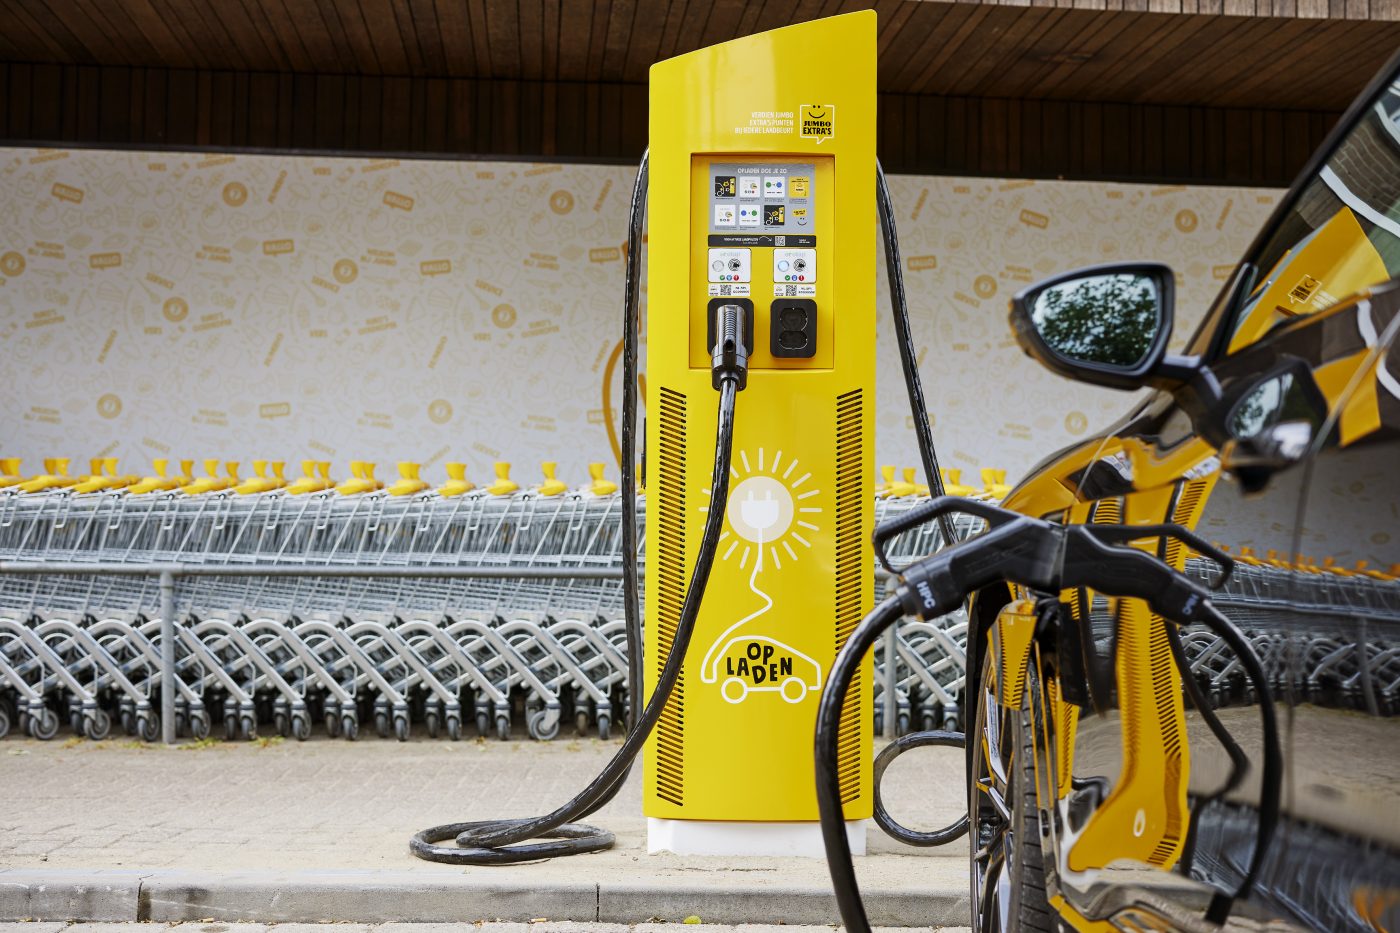 From today, Jumbo customers can charge their electric vehicles in Nieuwegein (the Netherlands). 